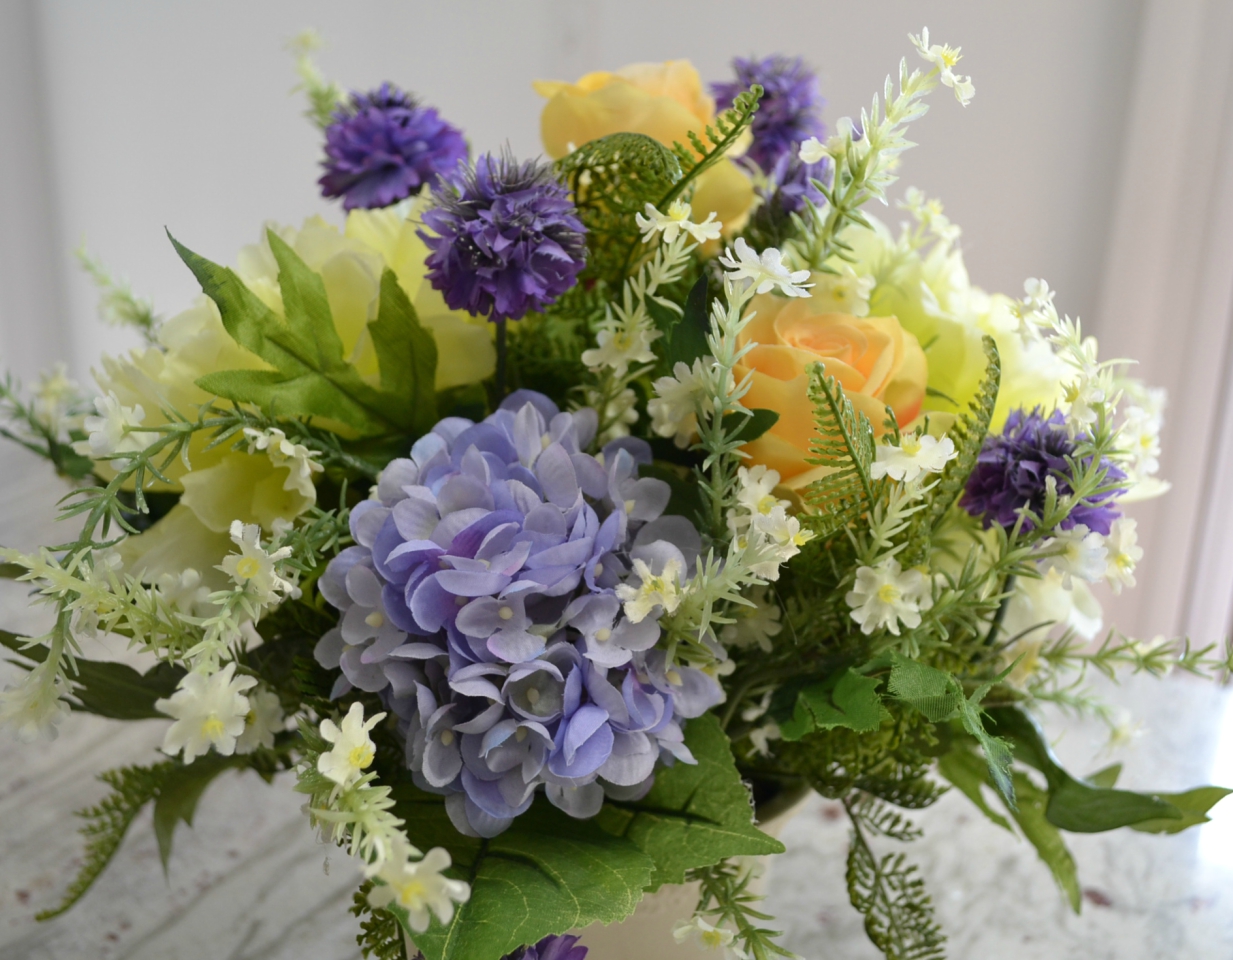 Review of a beautiful arrangement of colorful, silk flowers from Commercial Silk Int'l.